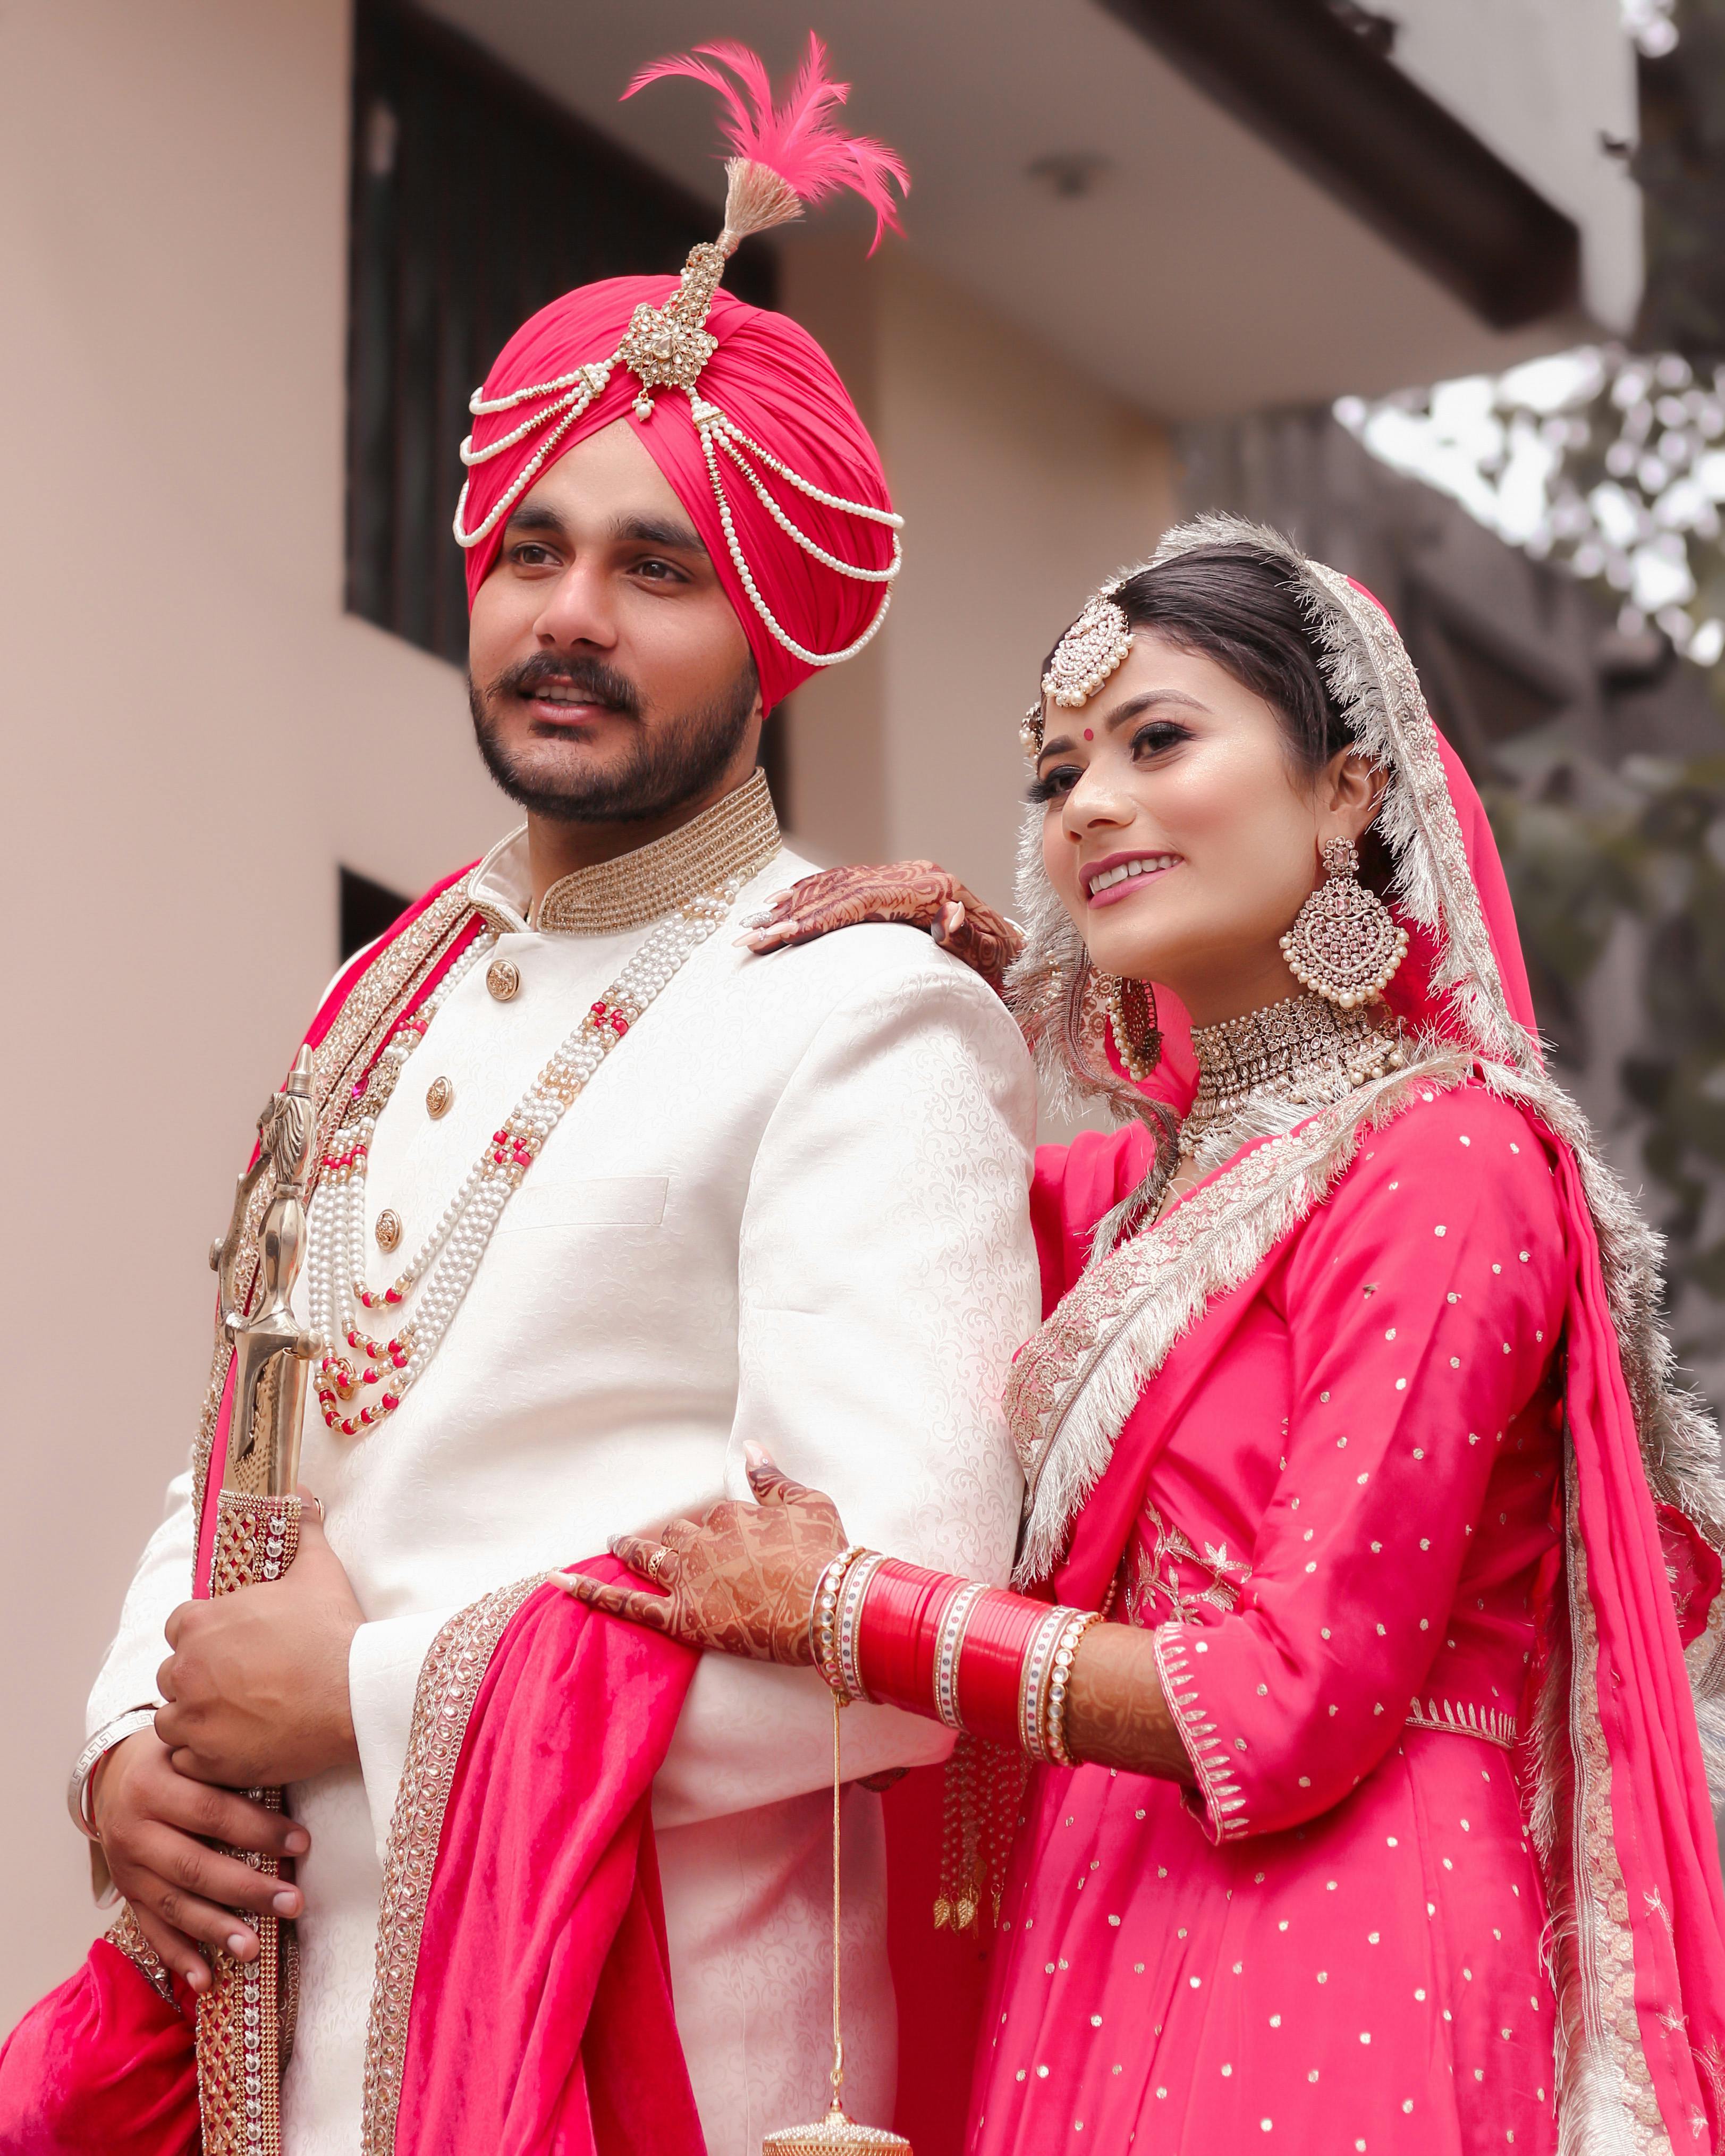 A Traditional Indian Wedding in Virginia's Picturesque Blue Ridge Mountains